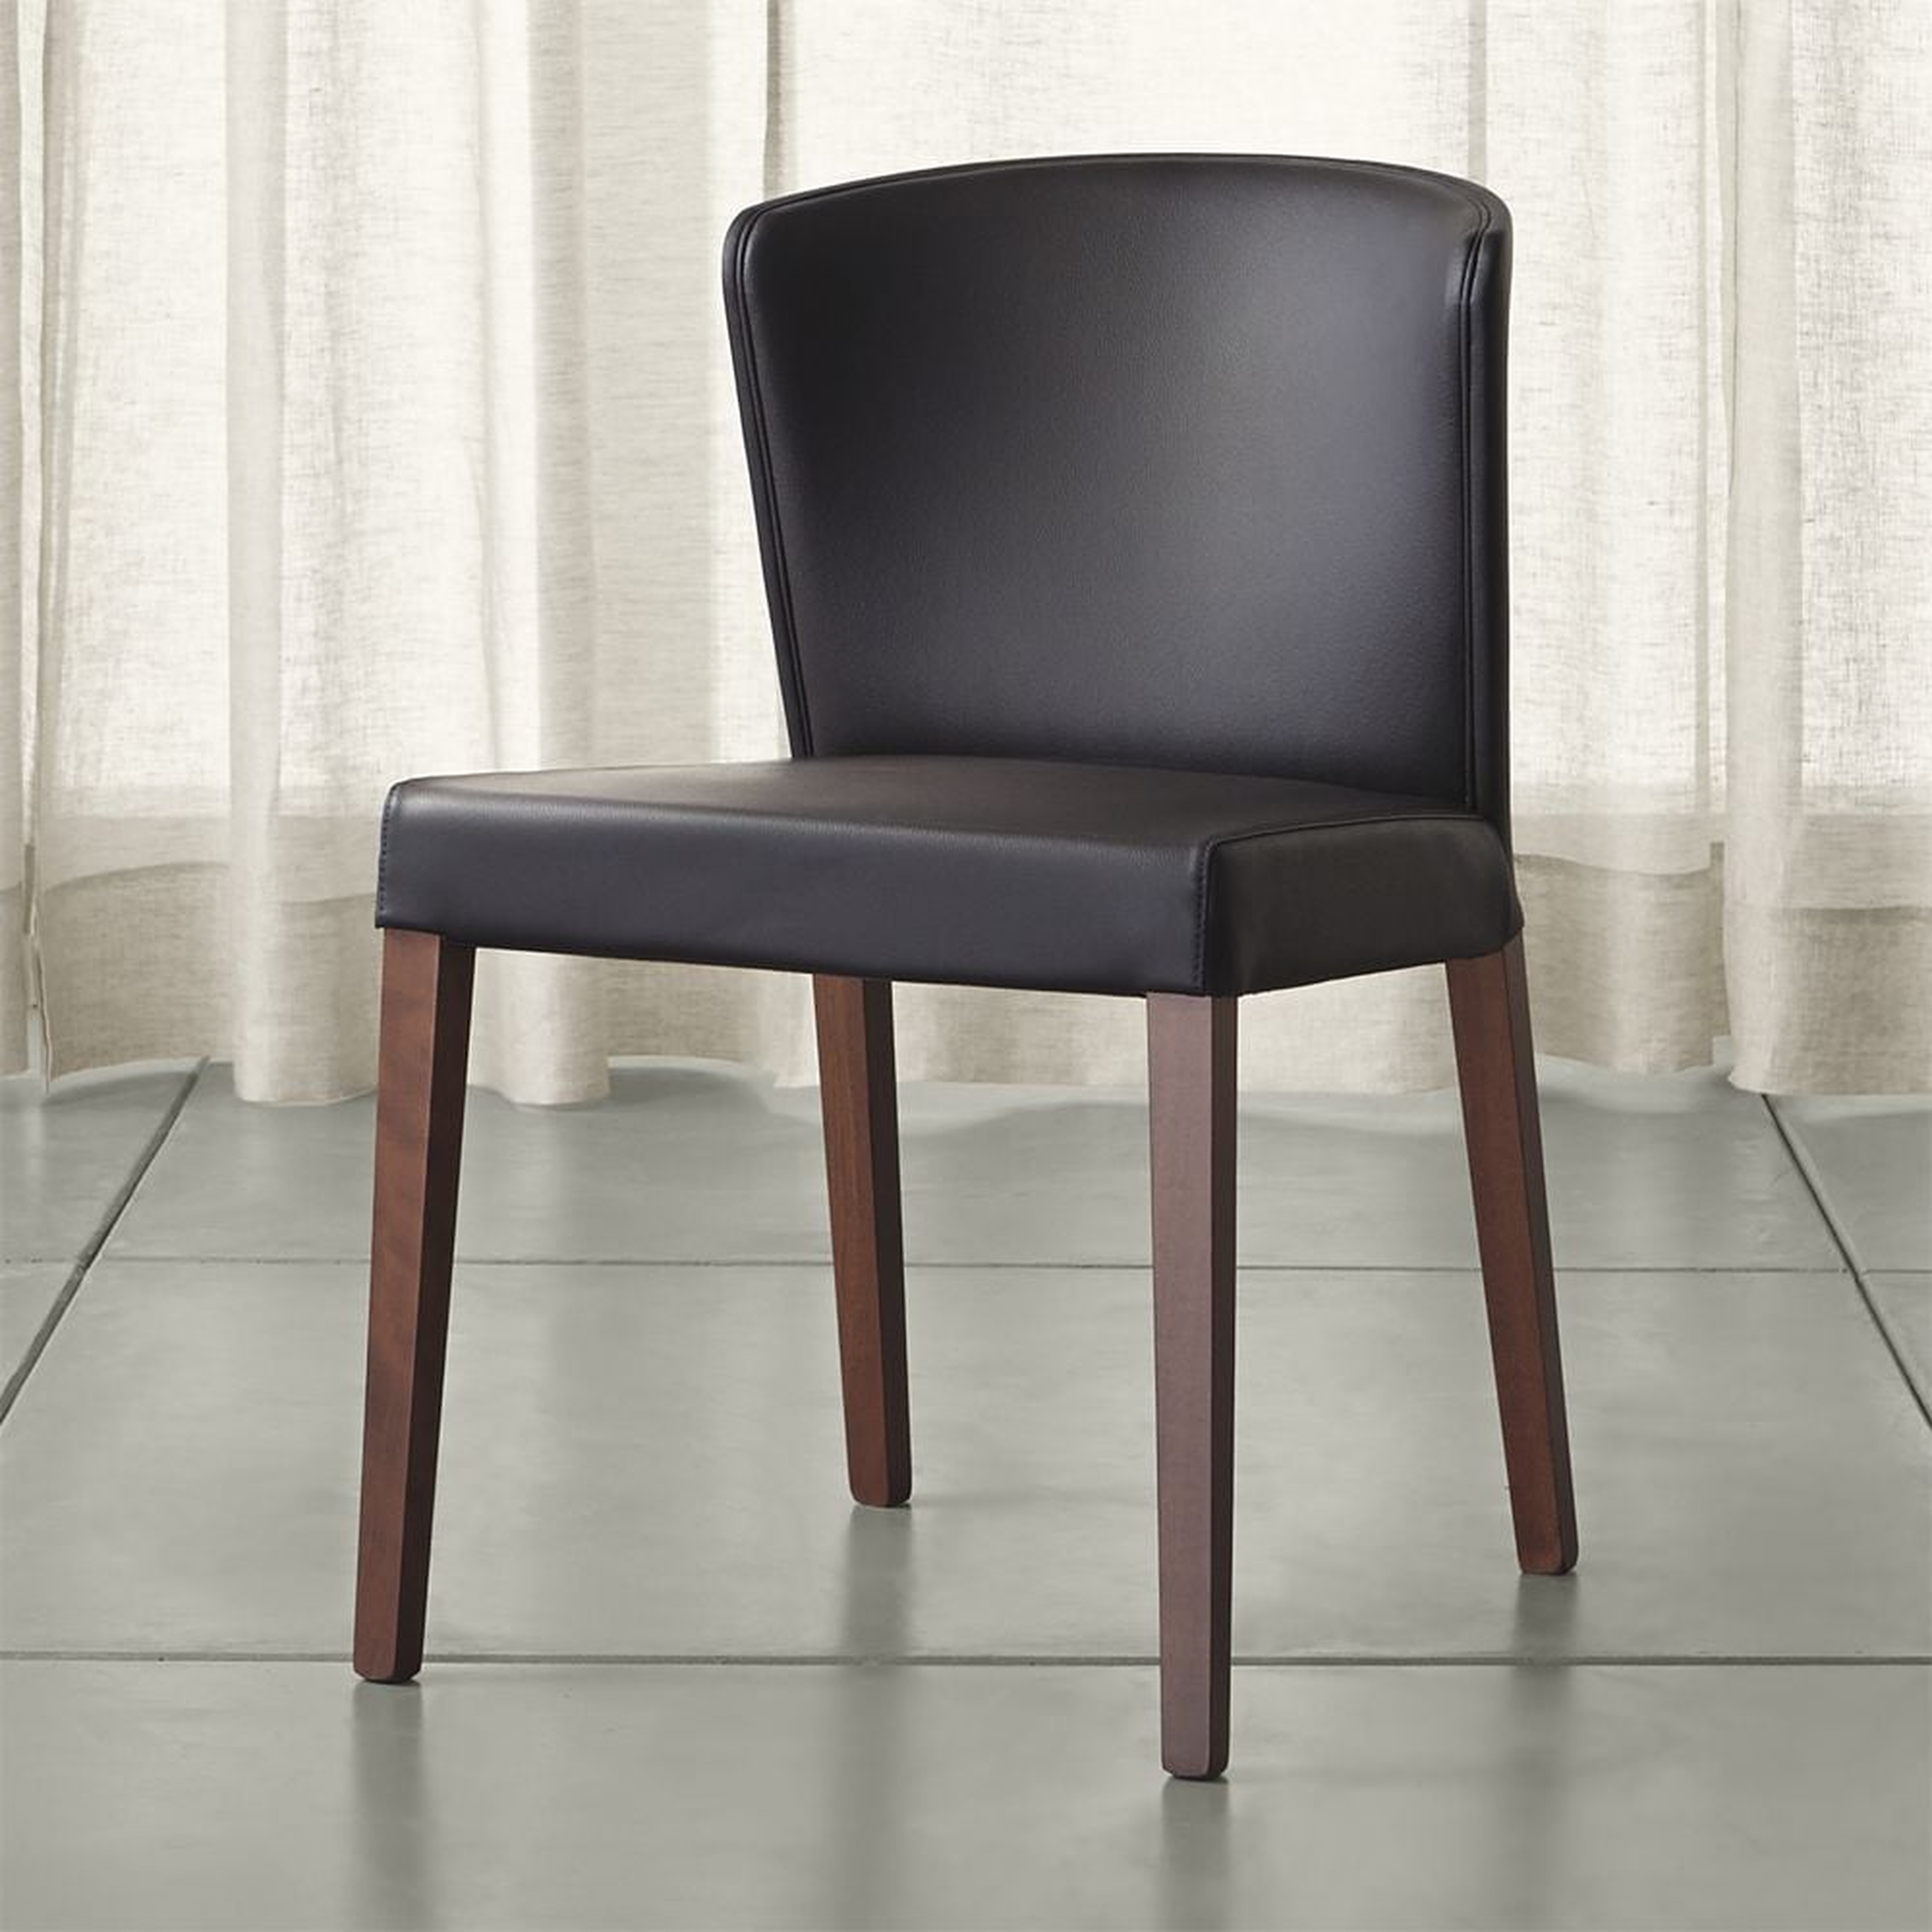 Curran Moss Brown Dining Chair - Crate and Barrel